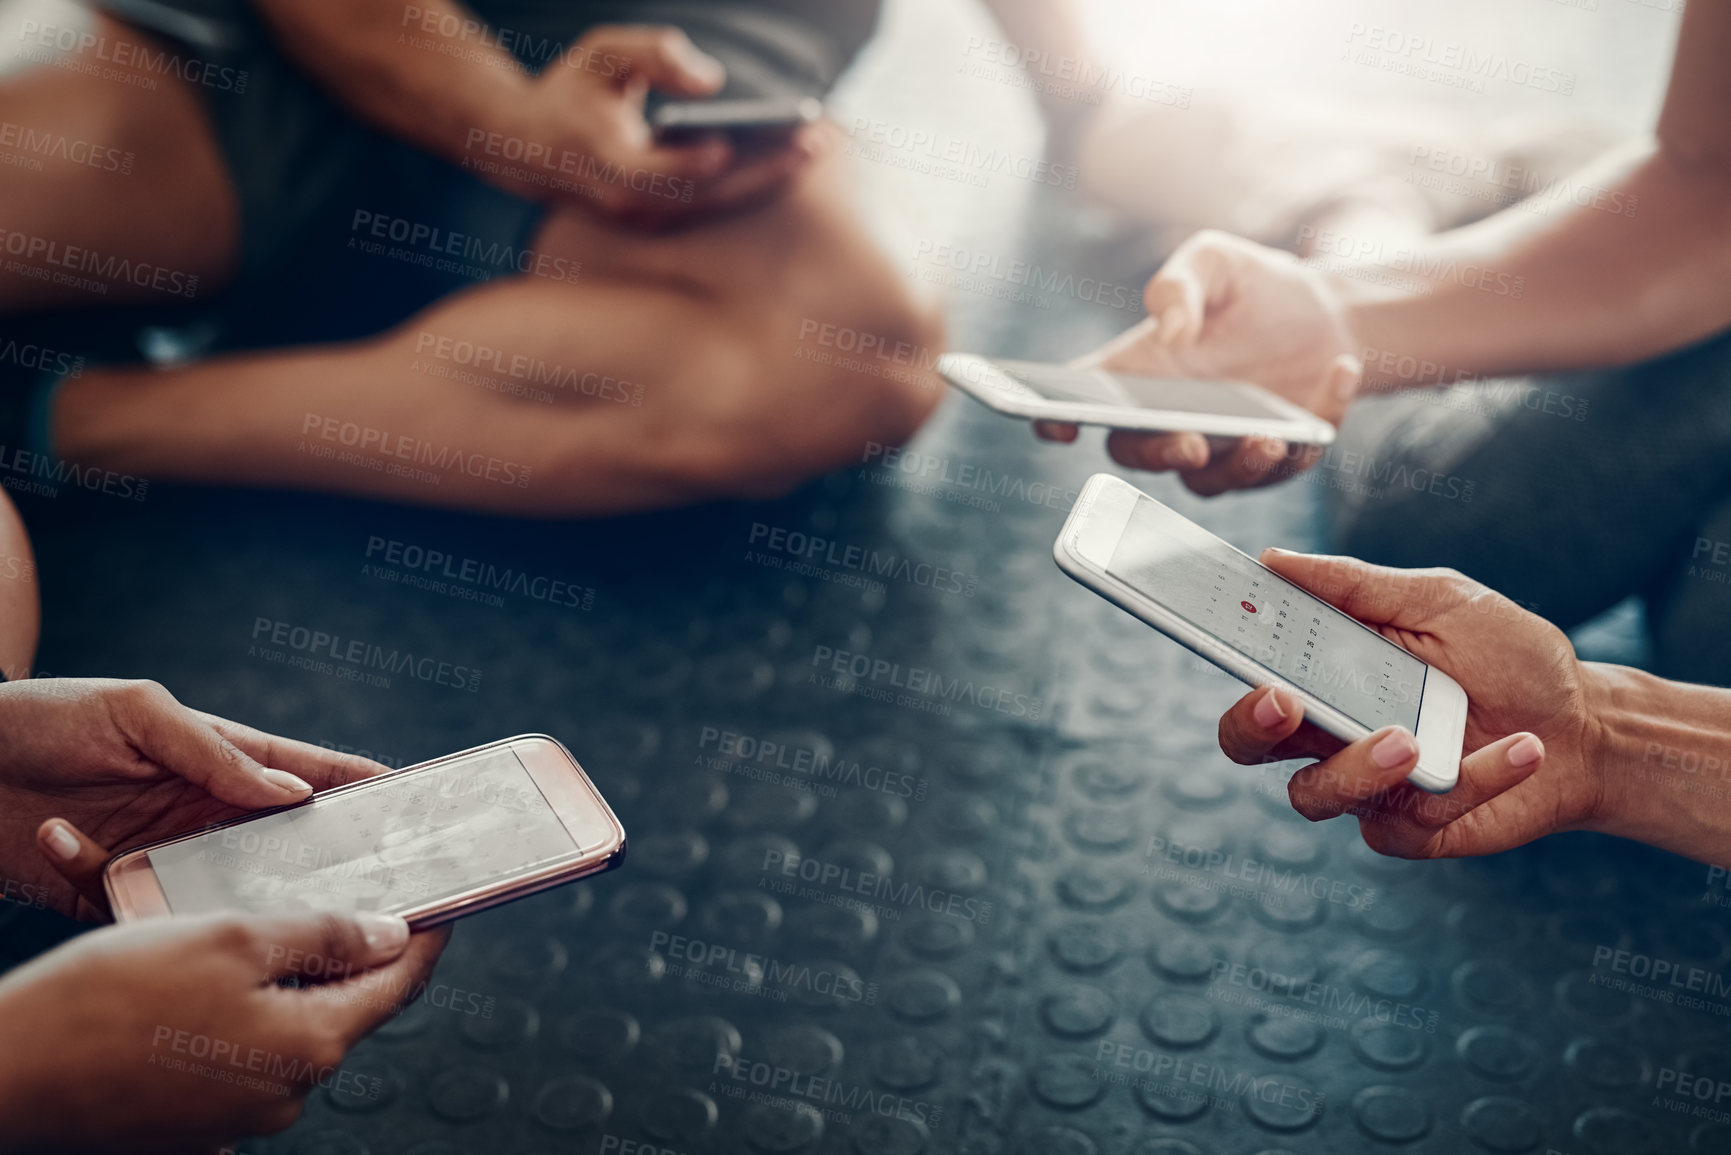 Buy stock photo Closeup shot of a group of people using their cellphones together at the gym